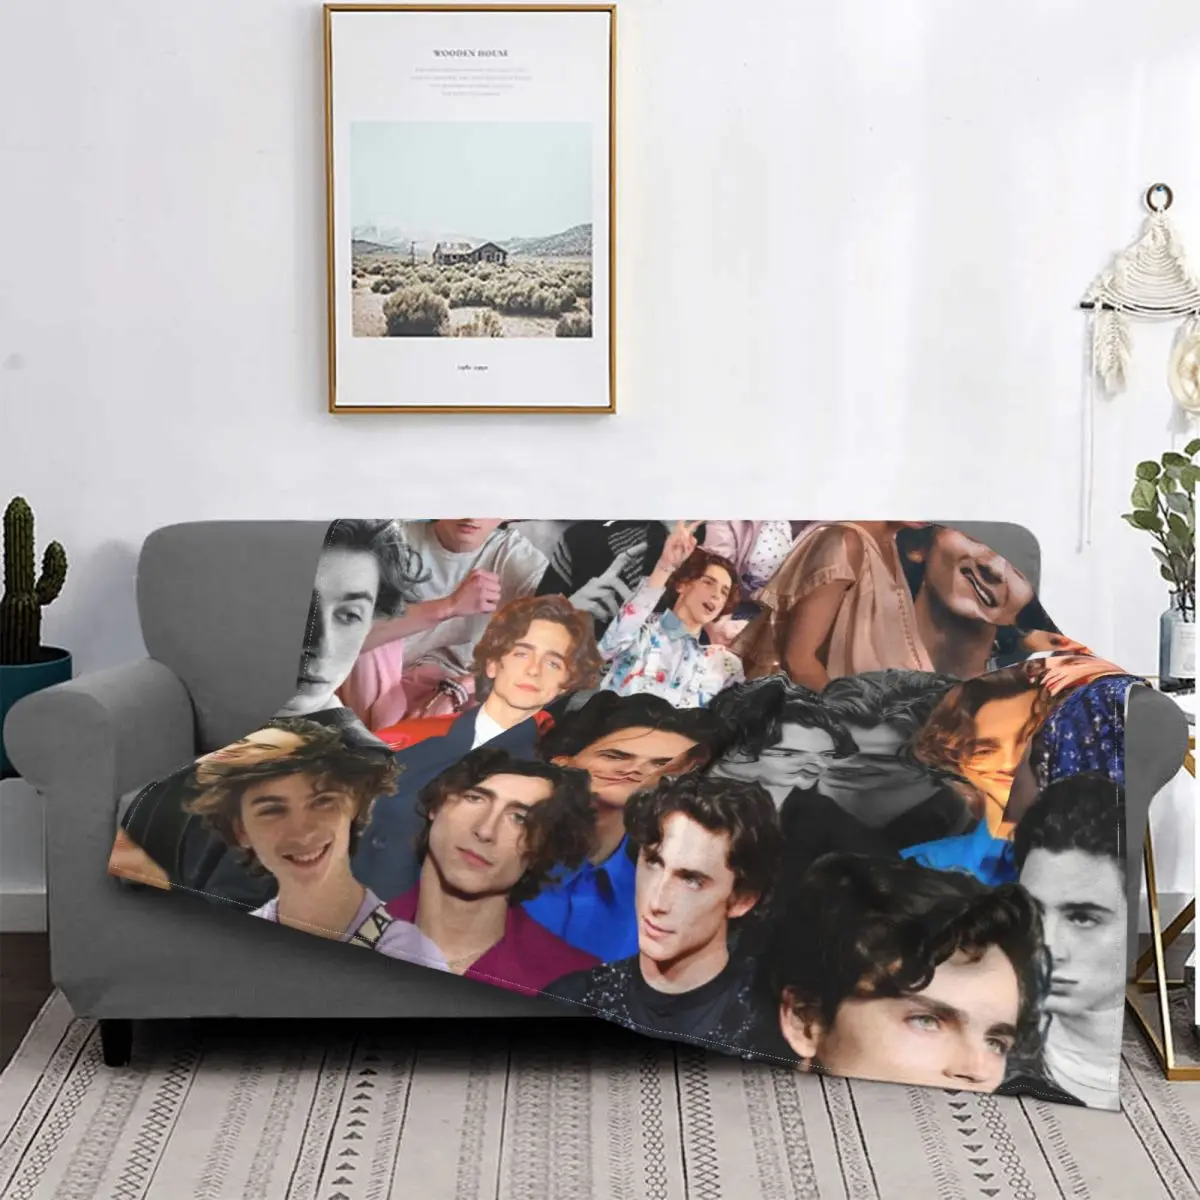 

Timothee Chalamet Collage Blankets movies tv netflix cute actor Flannel Awesome Warm Throw Blanket Bedding Lounge Spring/Autumn